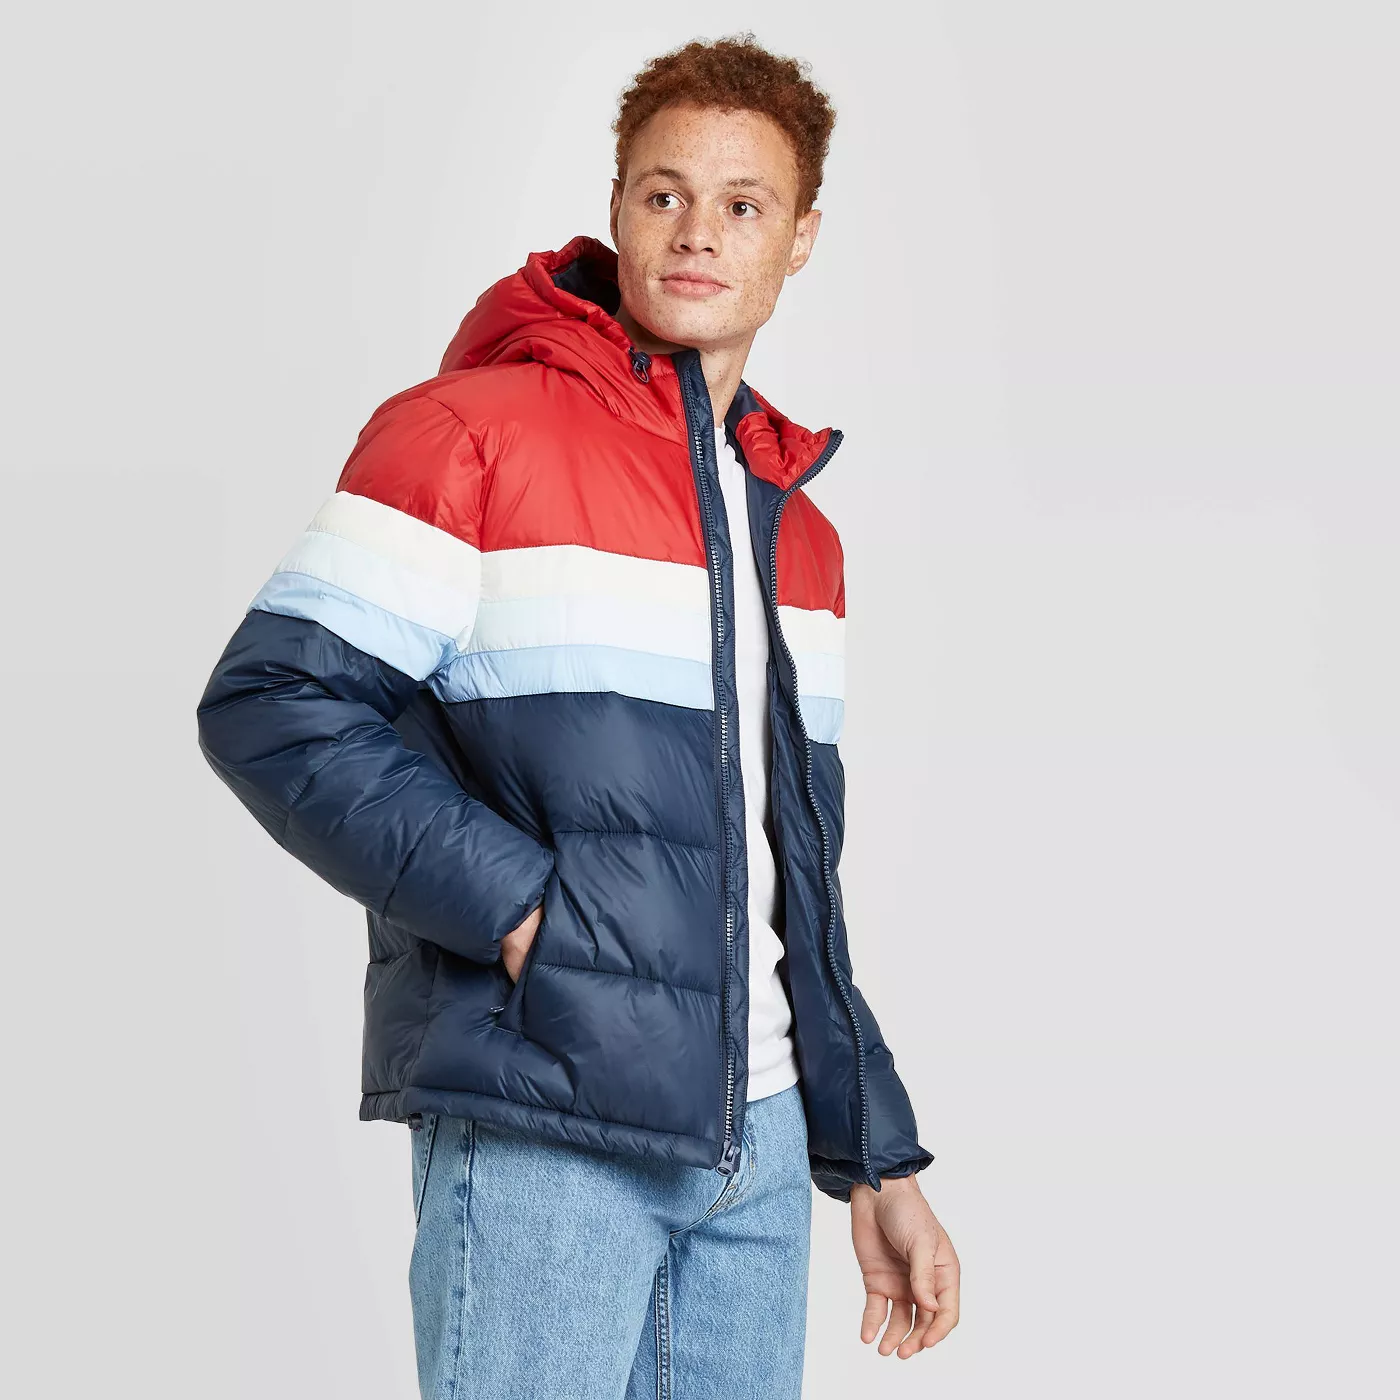 Men's Hooded Puffer Jacket - Goodfellow & Co™ - image 1 of 3